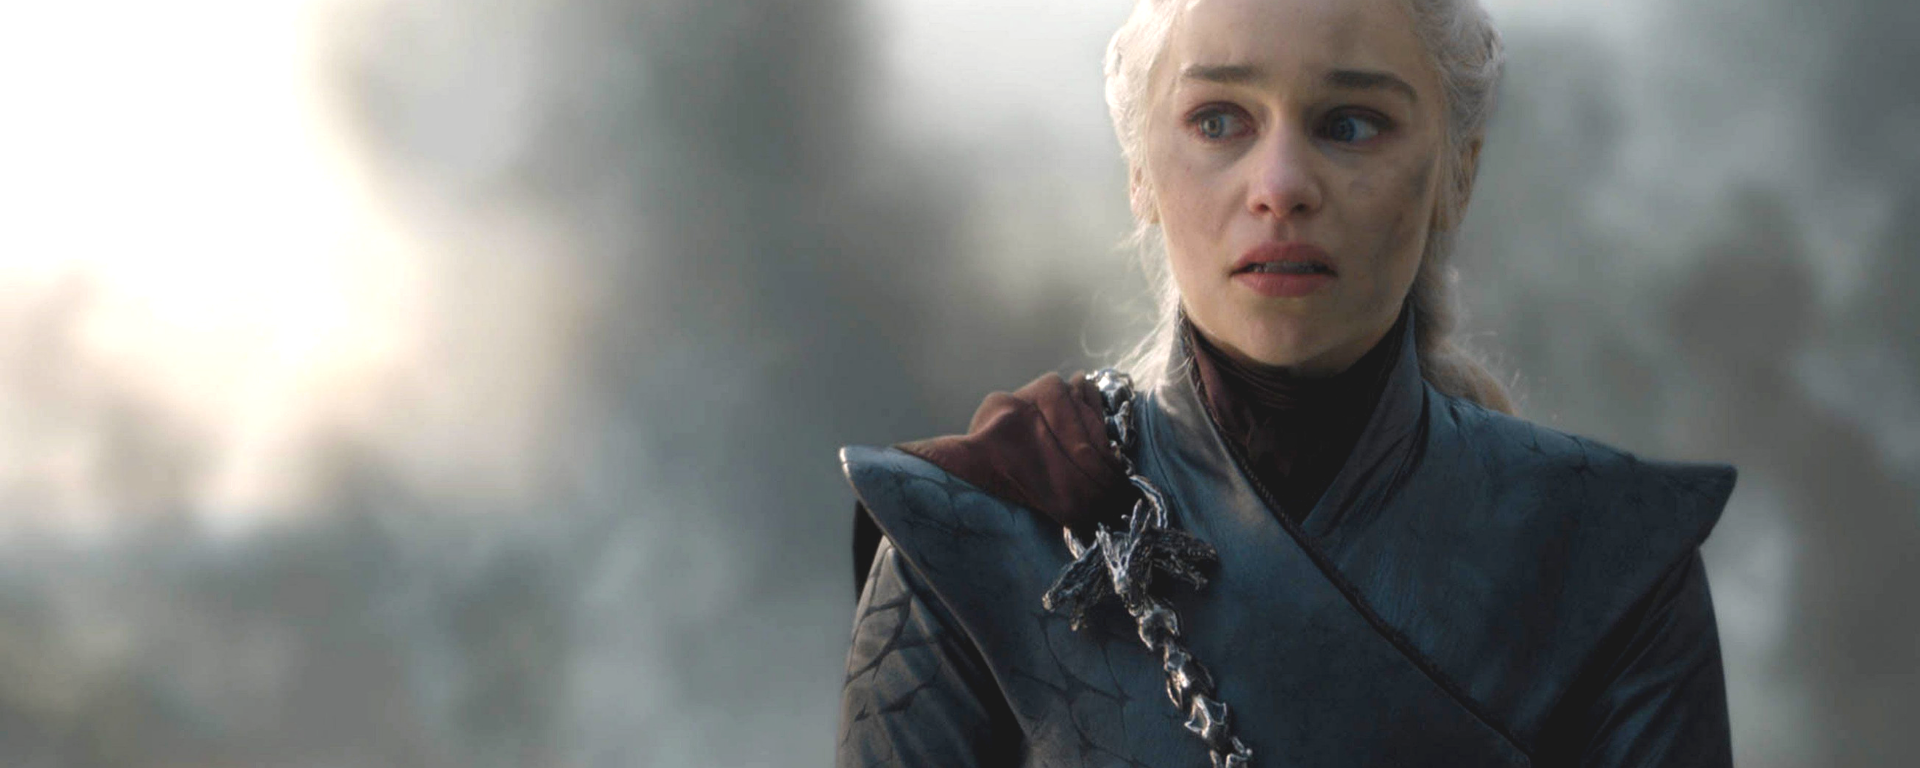 Emilia Clarke as Daenarys Targaryen in the penultimate episode of HBO's "Game of Thrones." Daenarys was one of several female characters on the show who were mistreated in their portrayal.